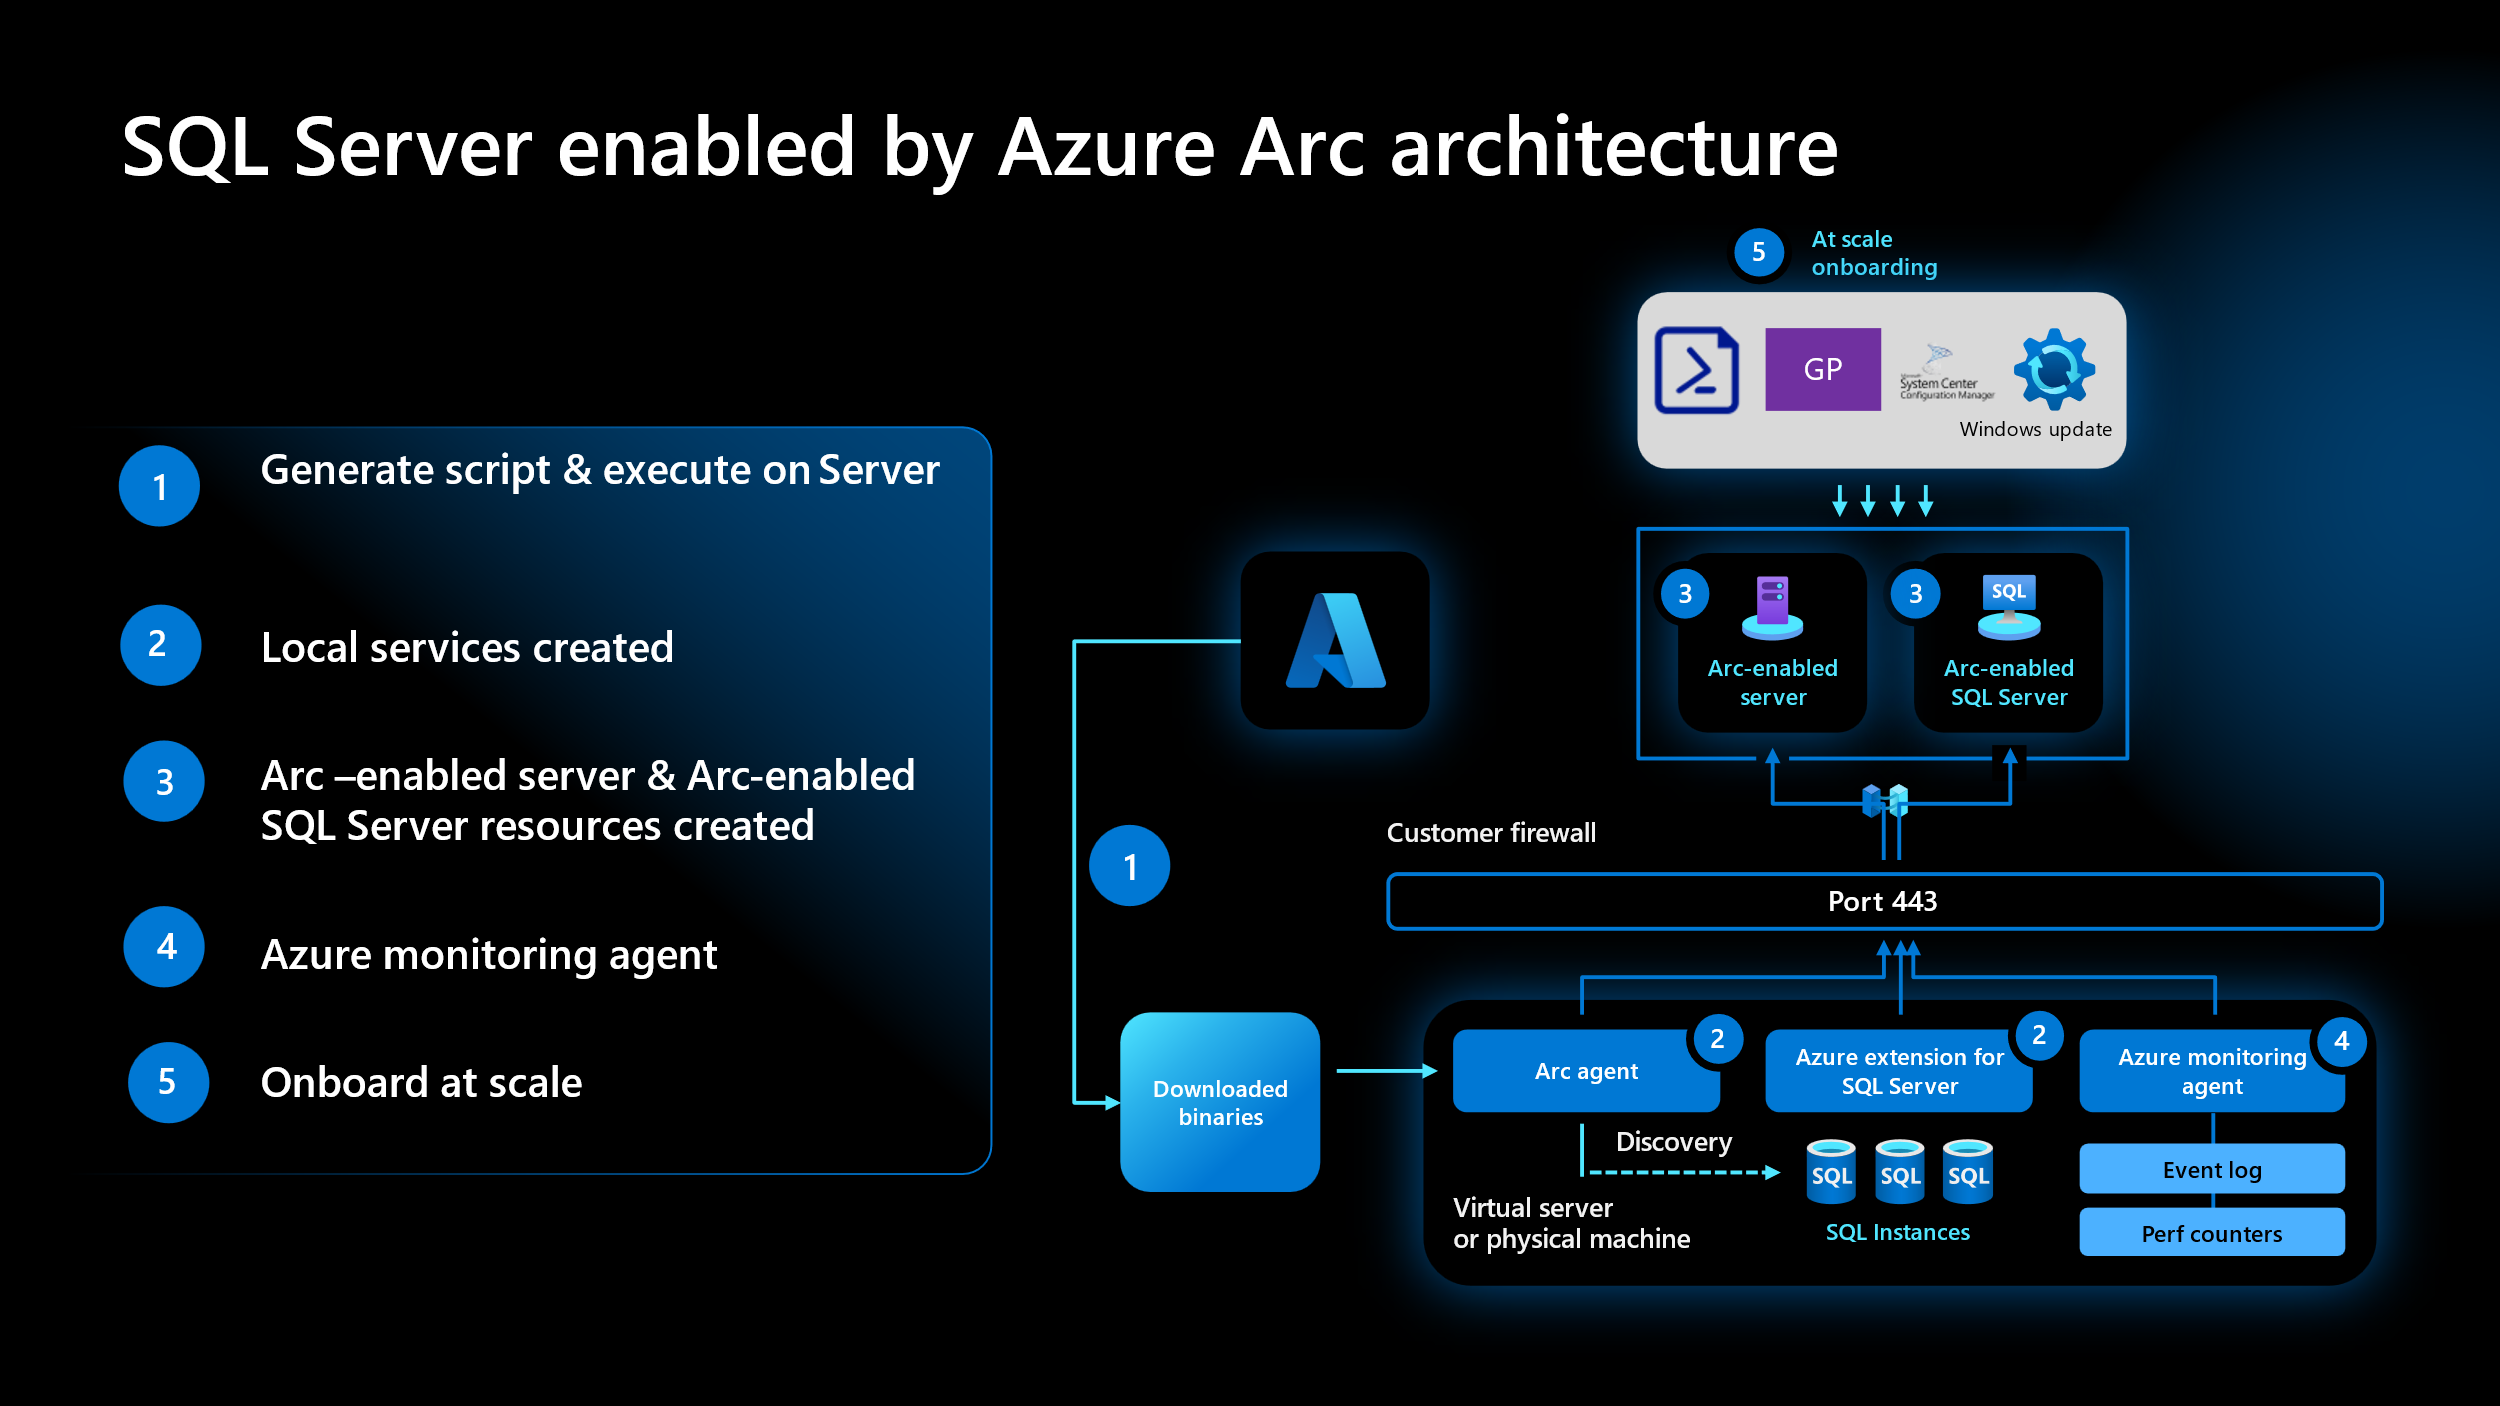 Customer infrastructure hosts virtualization and persistent storage. Use the Azure portal or the appropriate CLI to manage the SQL Server instance.